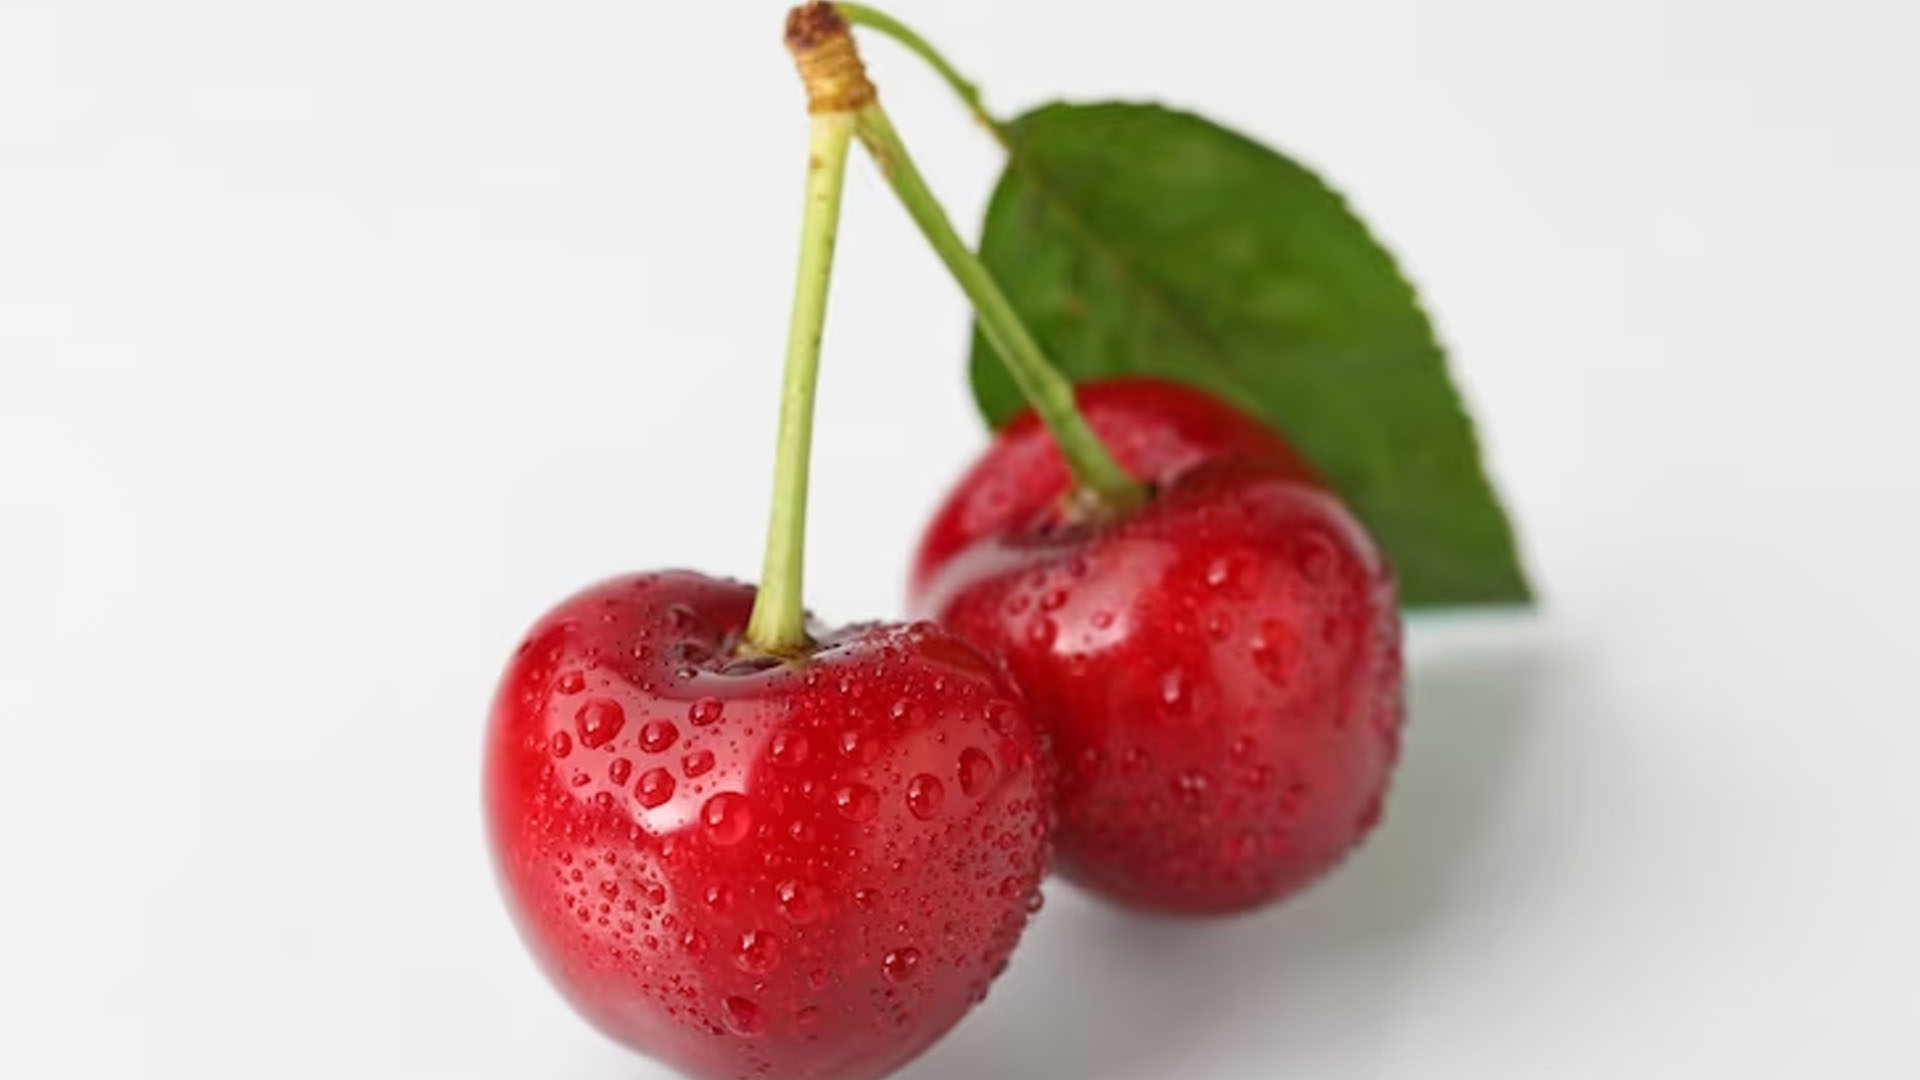 What Are The Health Benefits of Eating Cherry?